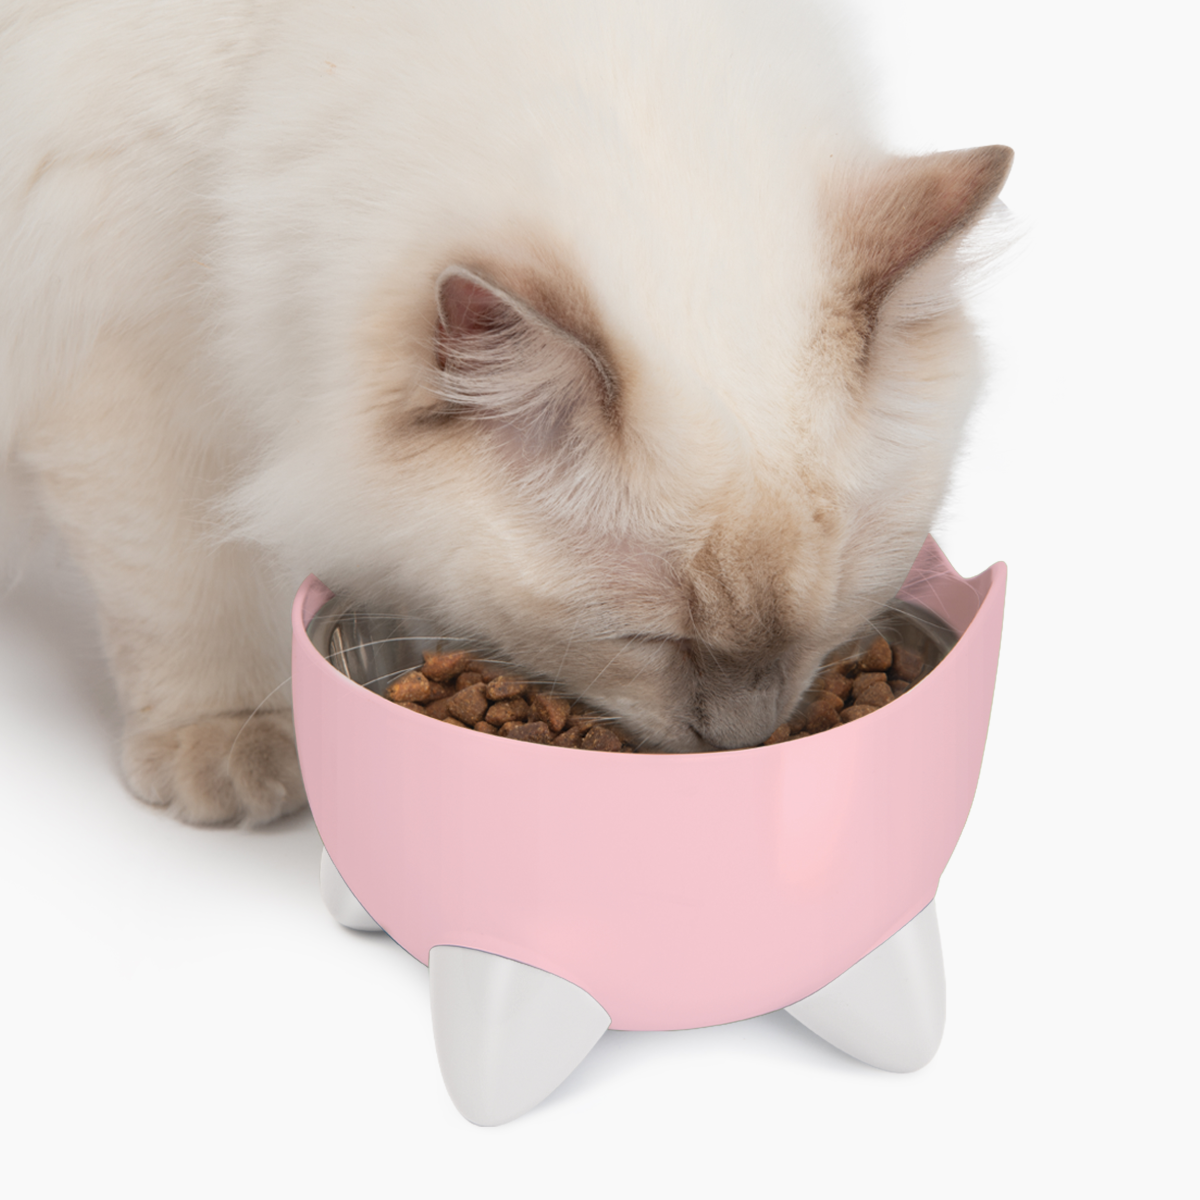 CatIt Pixi Drinking Fountain - Combo Pack/Pink